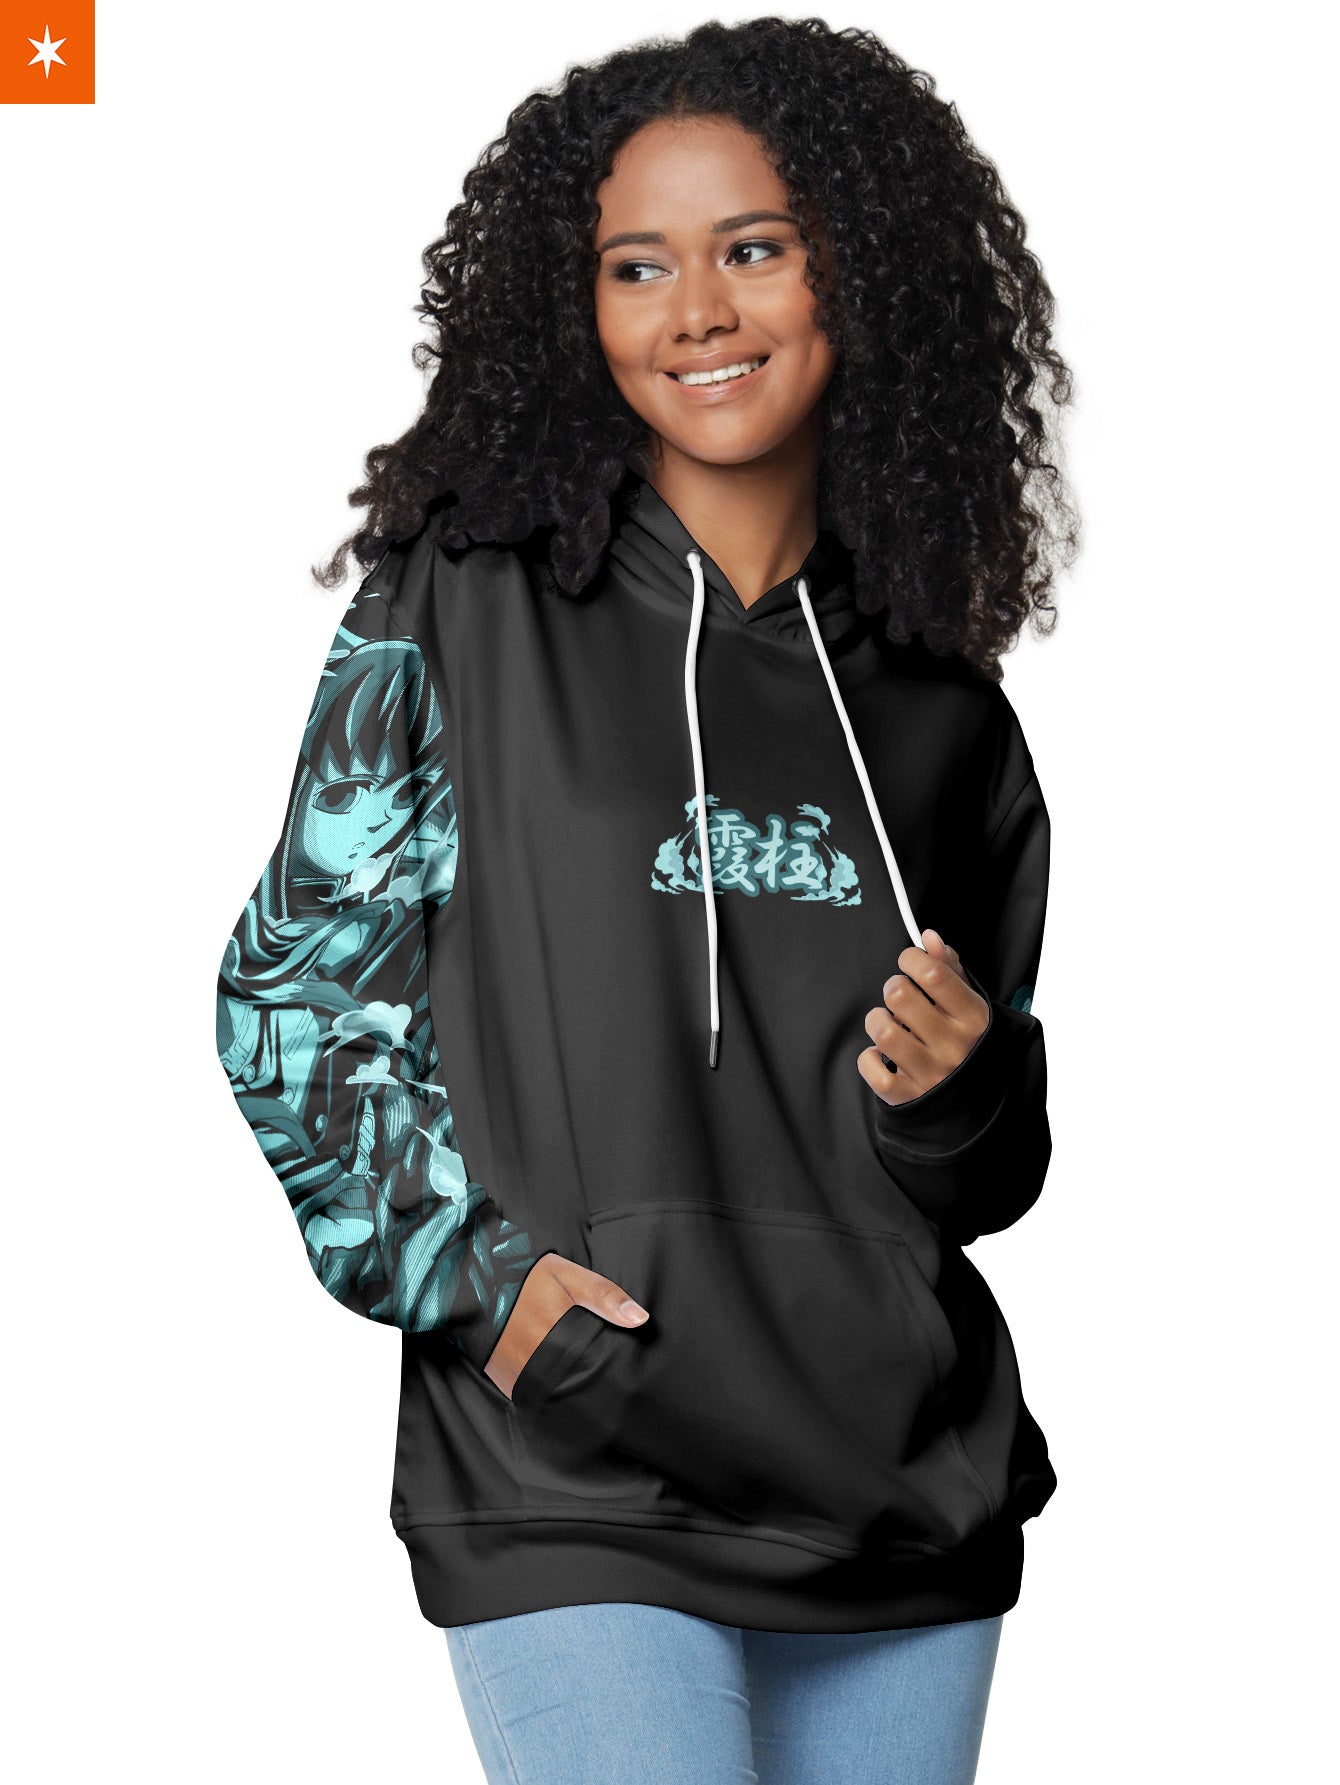 Child Prodigy Unisex Pullover Hoodie